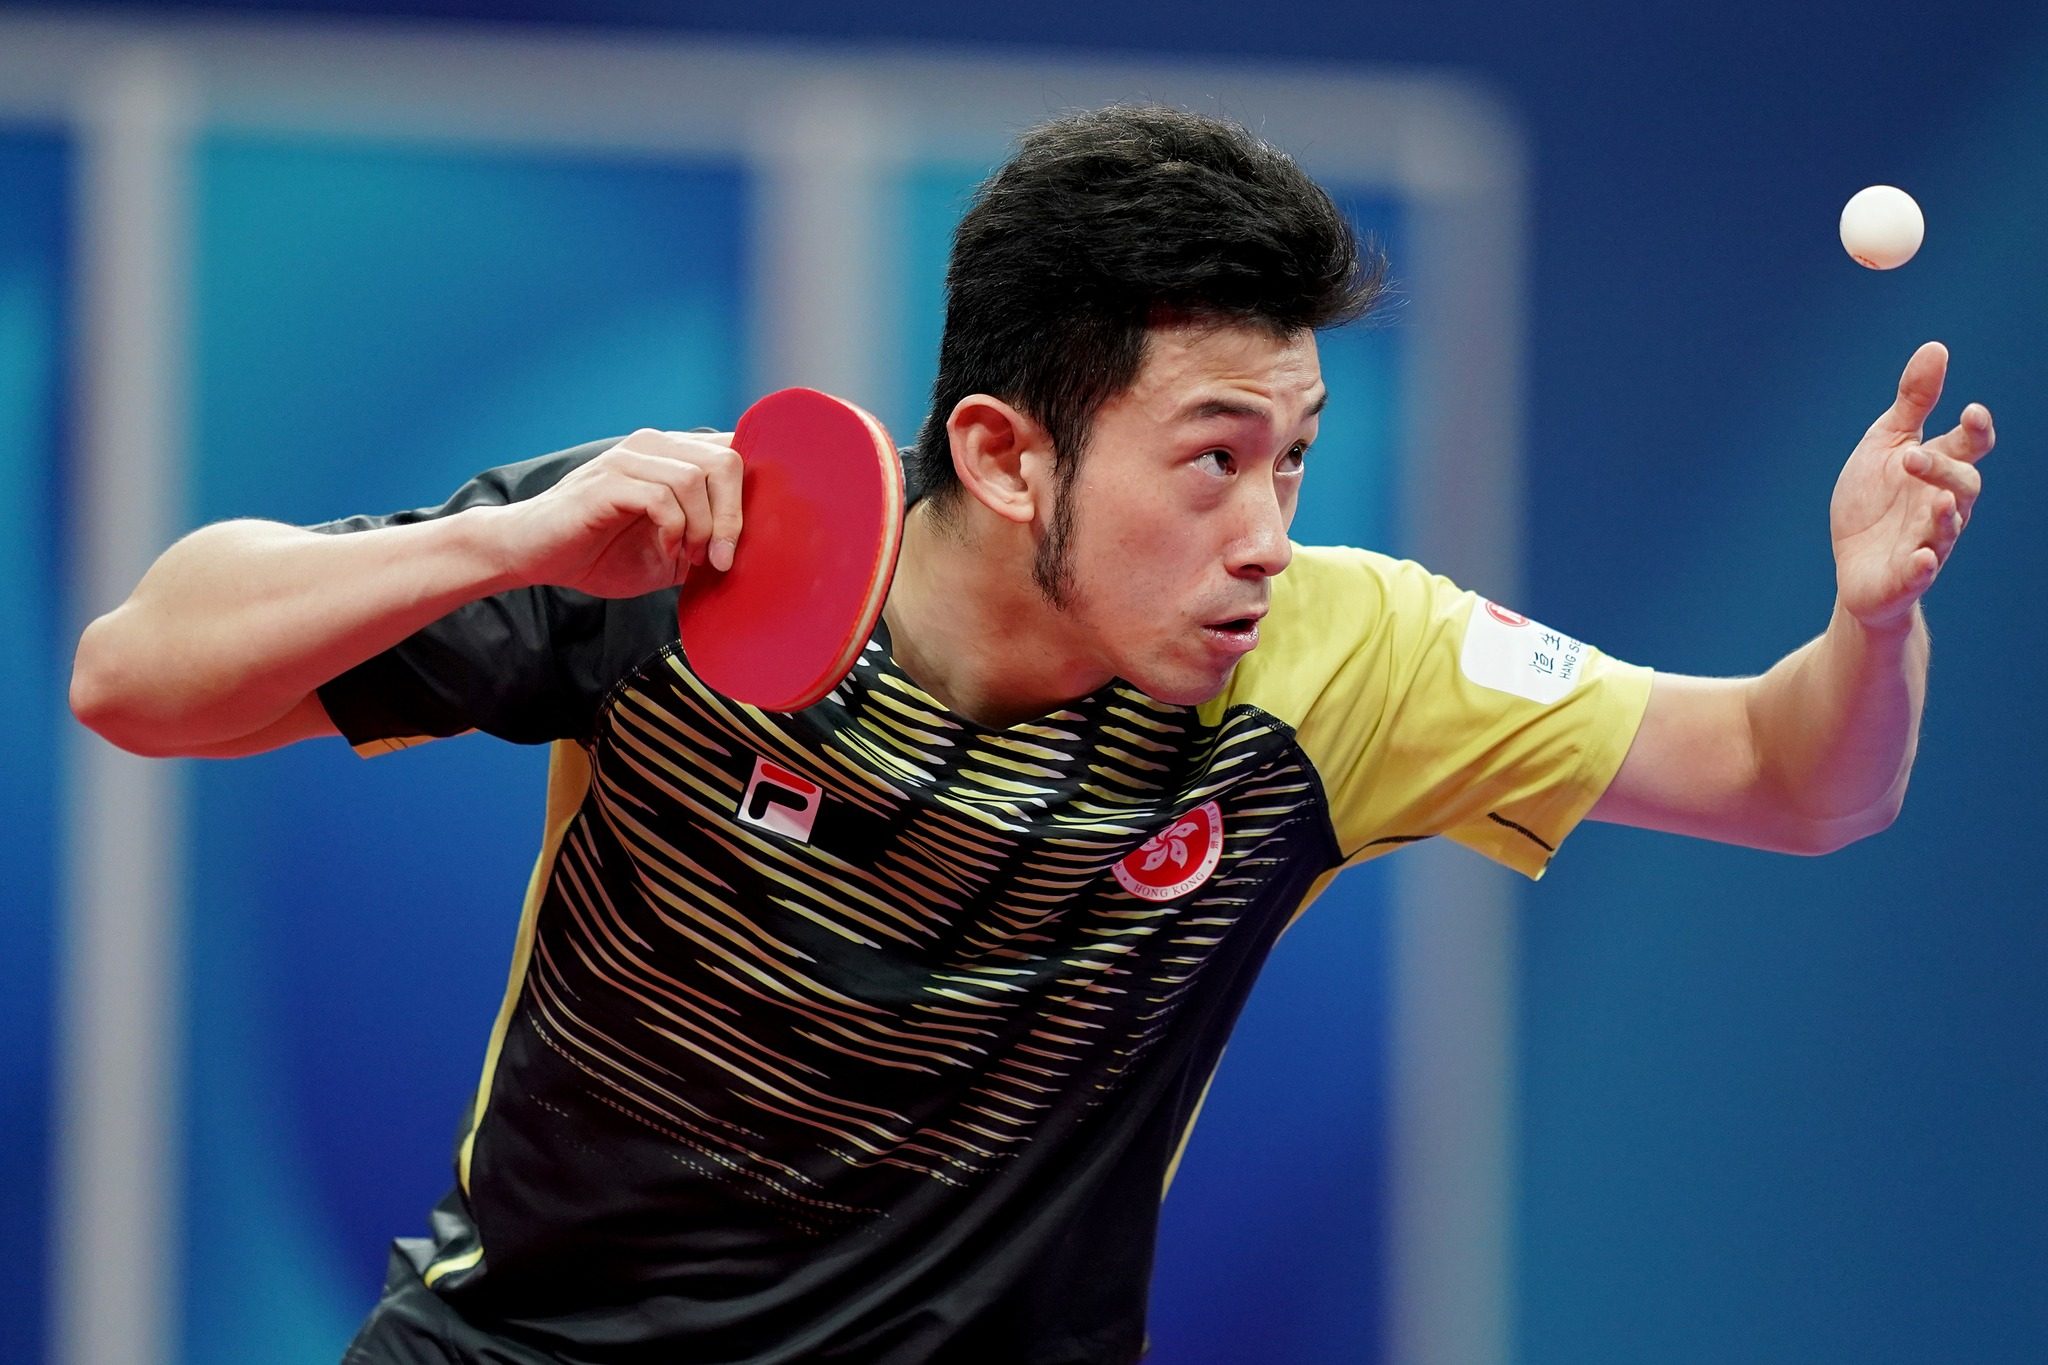 Wong Chun-ting puts up a spirited fight against the Koreans but Hong Kong was still not good enough to reach the semifinals at the team World Championships in Chengdu, China. Photo: World Table Tennis